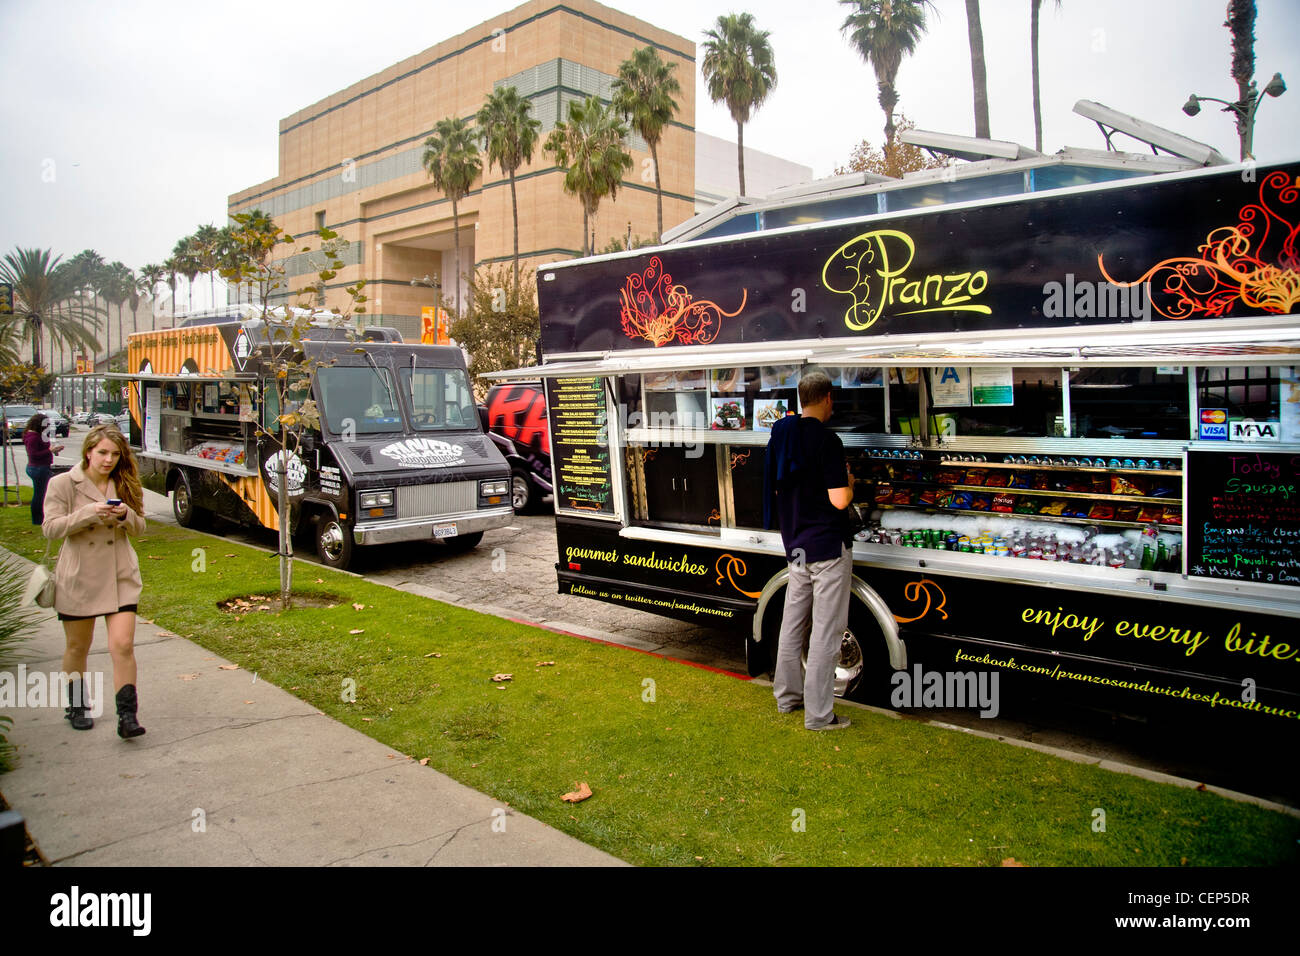 Gourmet food vans serve noontime lunch on Wilshire Boulevard, Los Angeles. Los Angeles County Museum of Art in background. Stock Photo